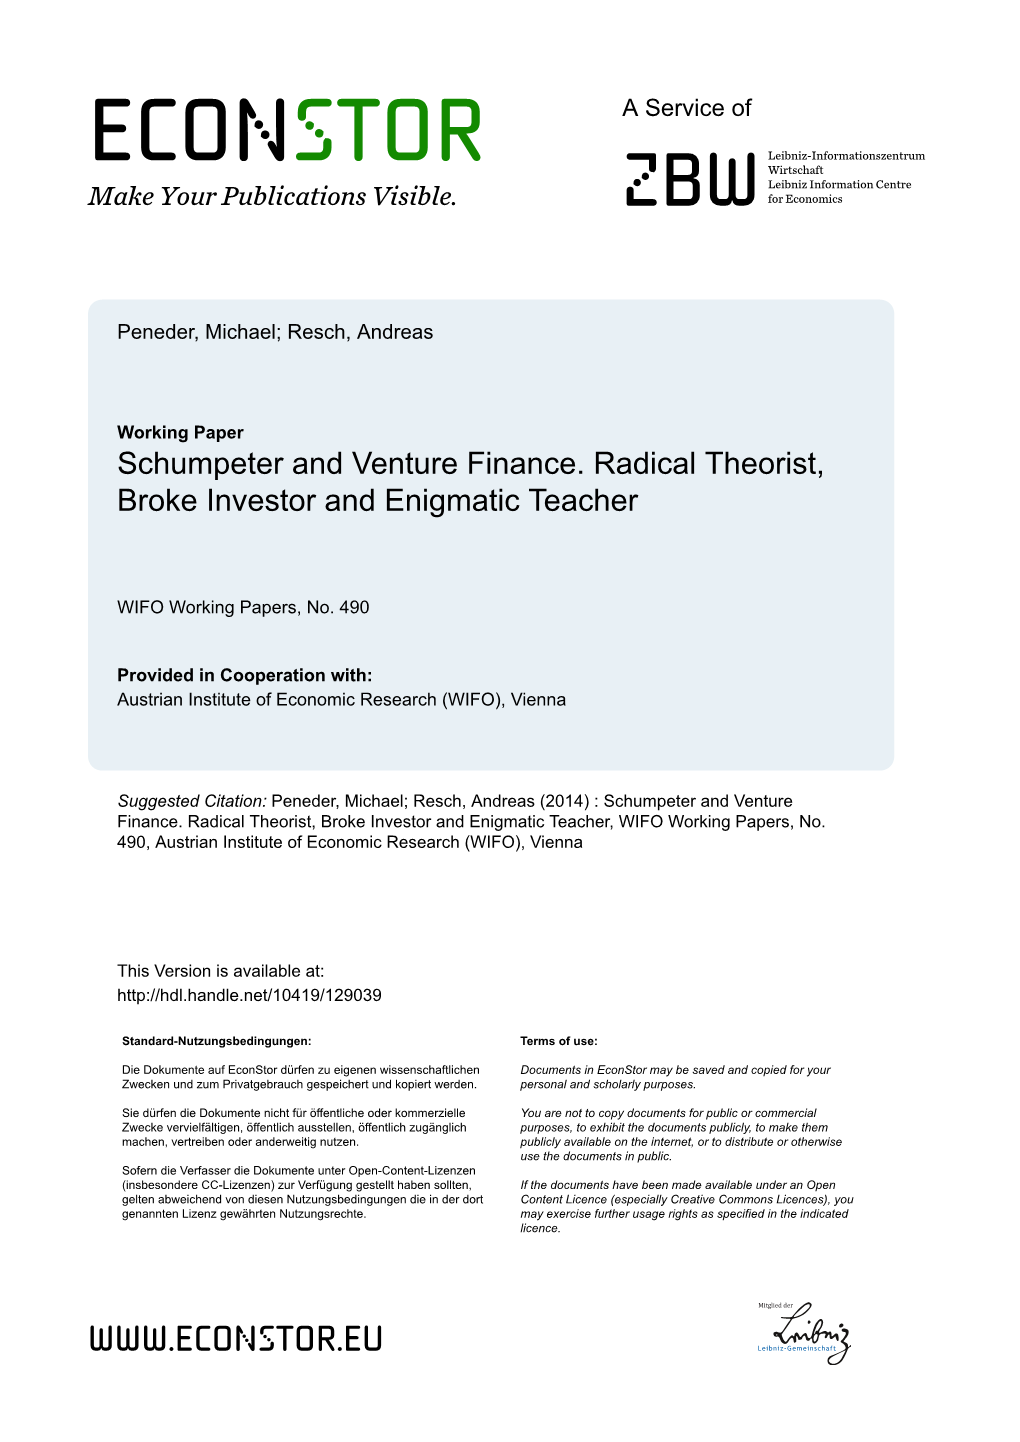 Schumpeter and Venture Finance. Radical Theorist, Broke Investor and Enigmatic Teacher